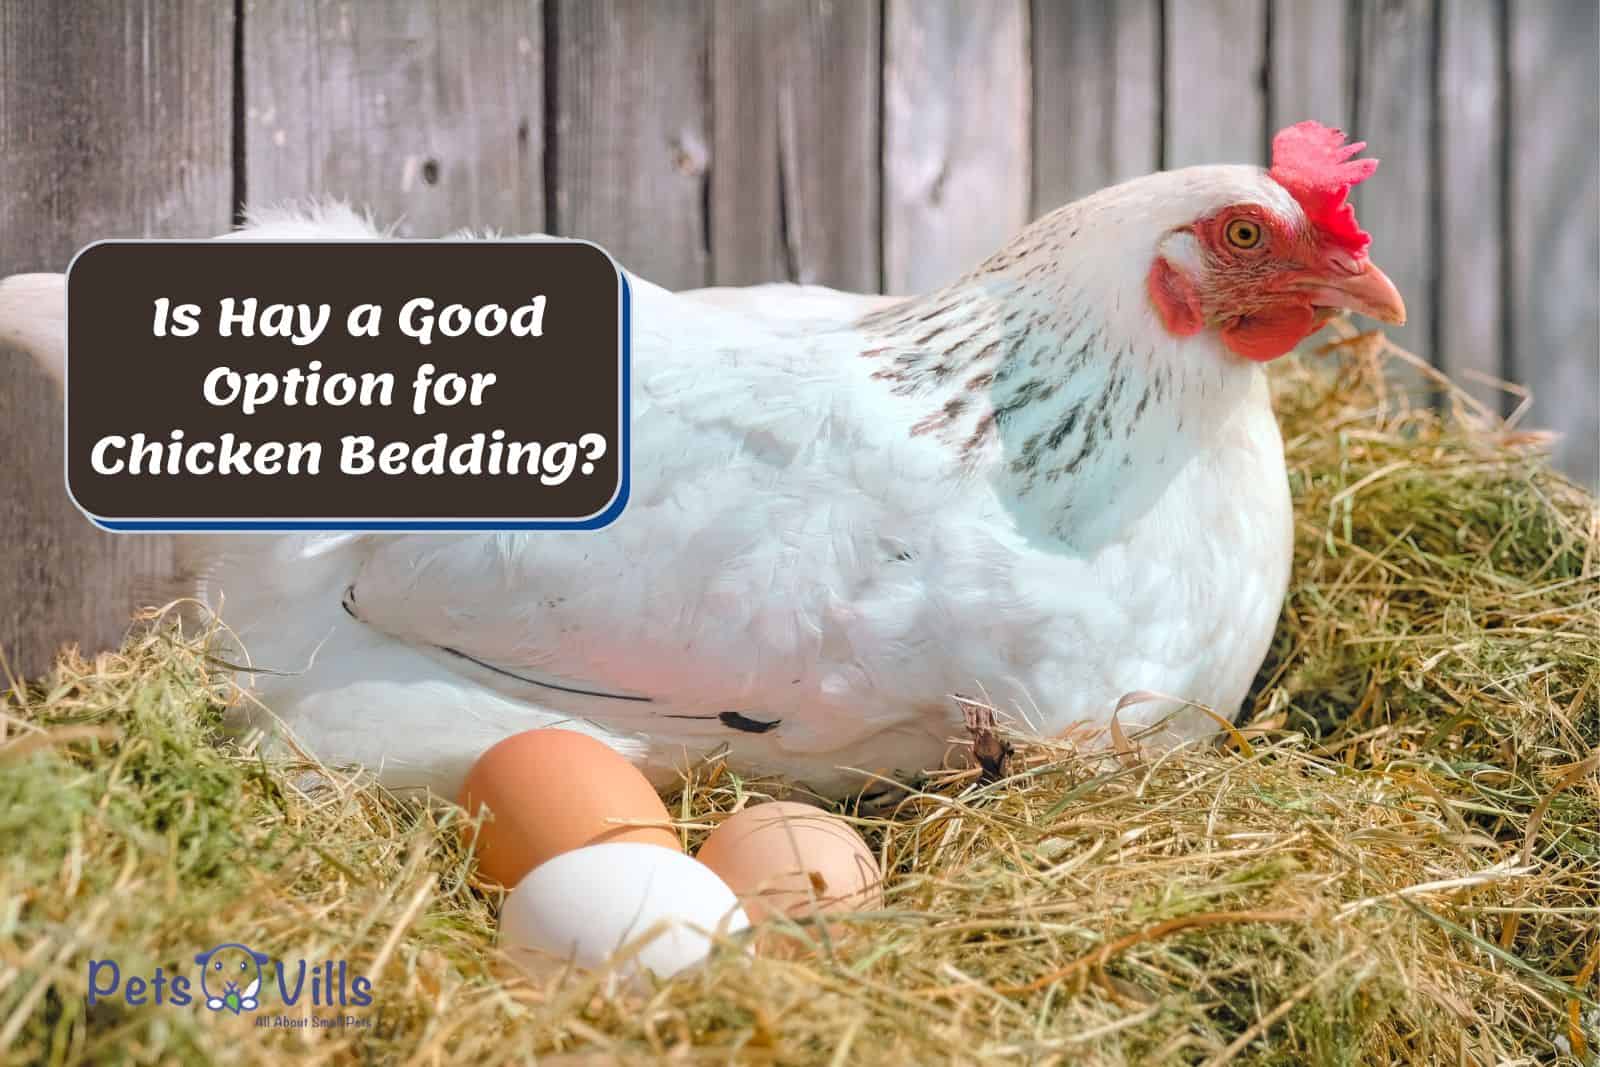 chicken laying eggs on hay but Can you use hay for chicken bedding?